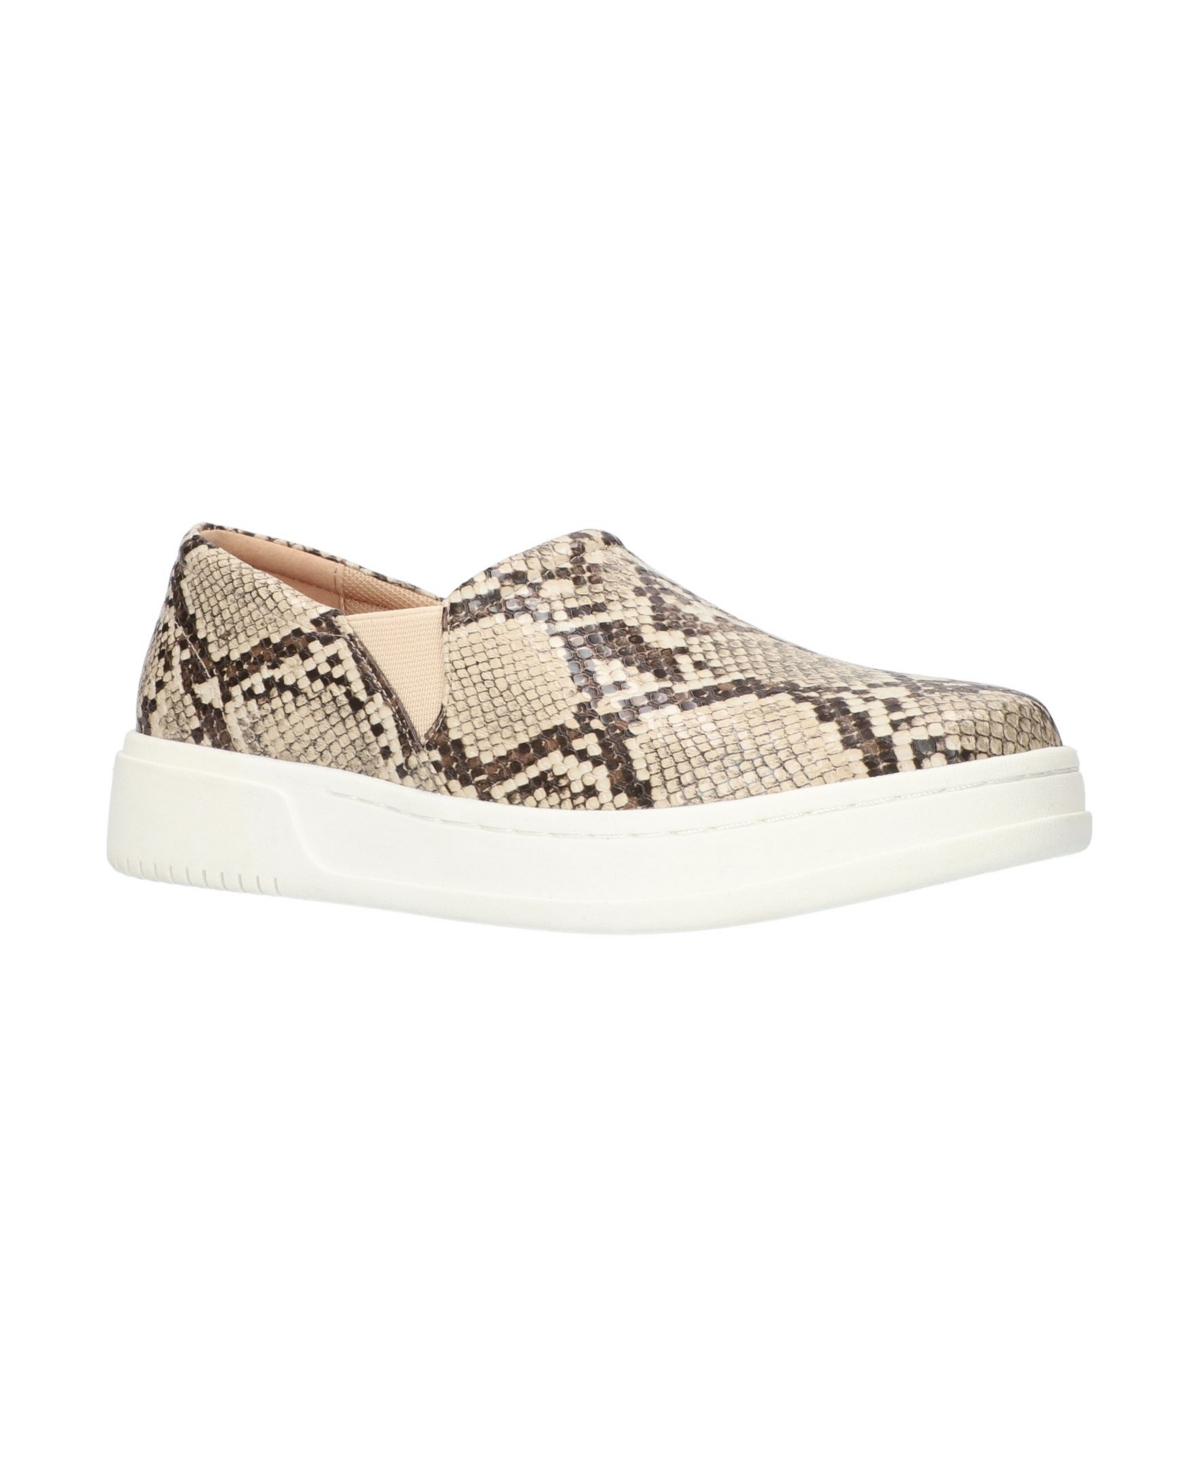 Women's Maribel Sneakers - Taupe Snake Faux Leather